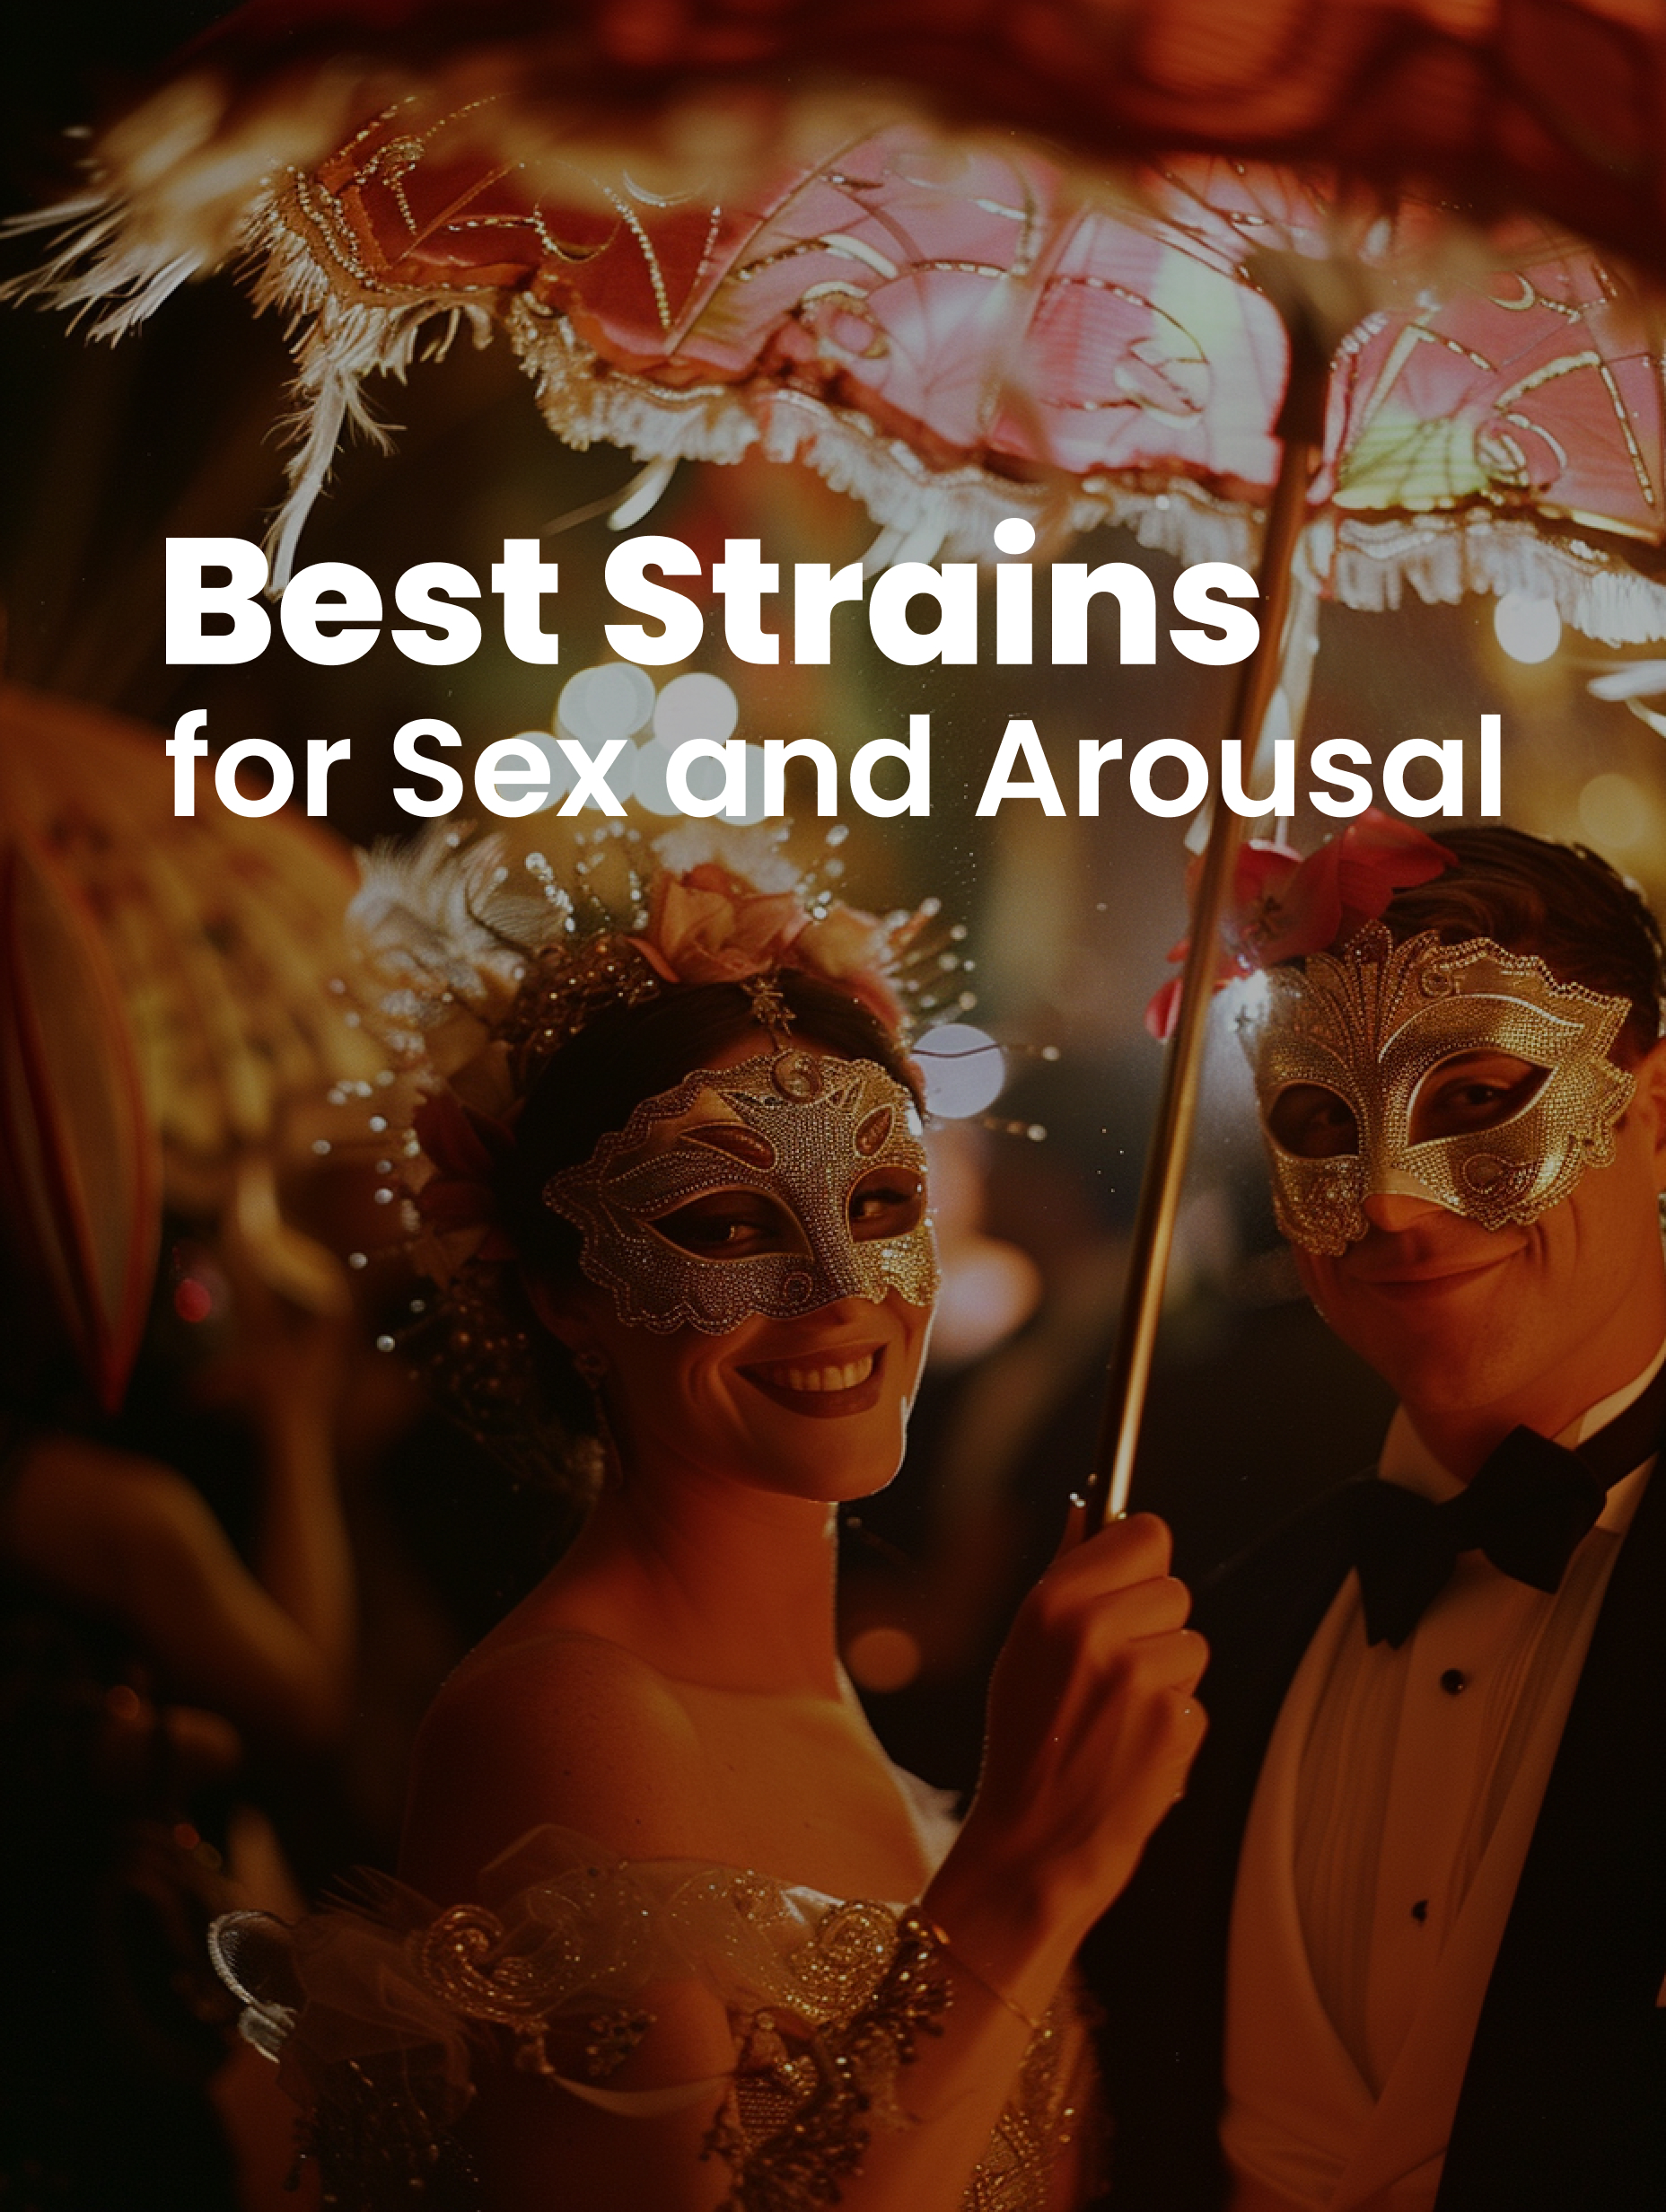 Best Strains for Sex and Arousal